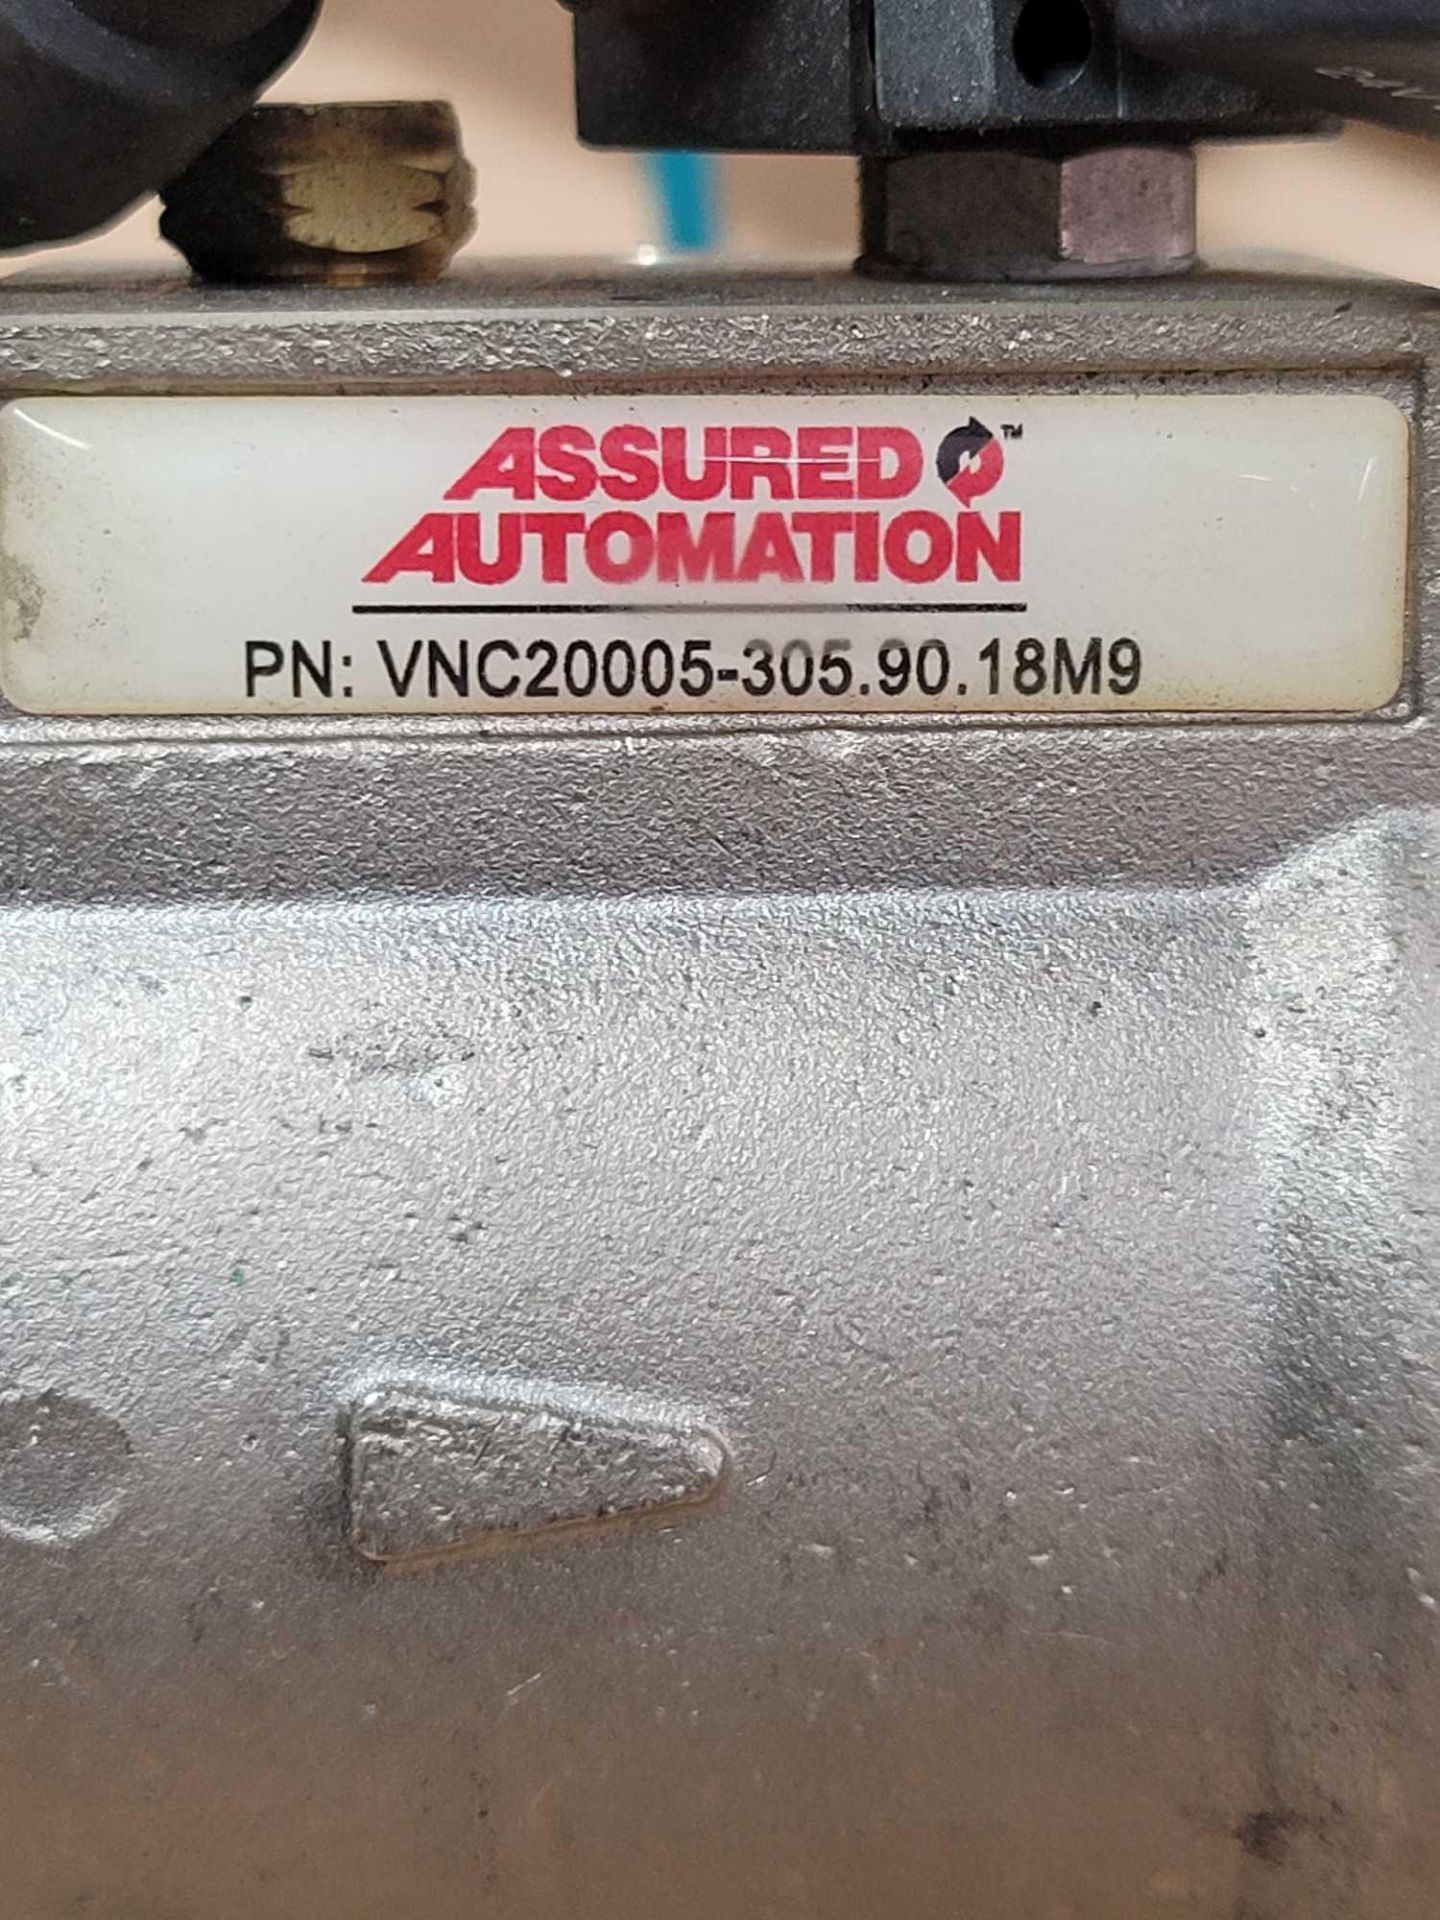 LOT OF 2 PROTEUS INDUSTRIES 9WSEV50G-1-001 with ASSURED AUTOMATION VNC20005-305.90.18M9 and ASSURED - Image 6 of 8